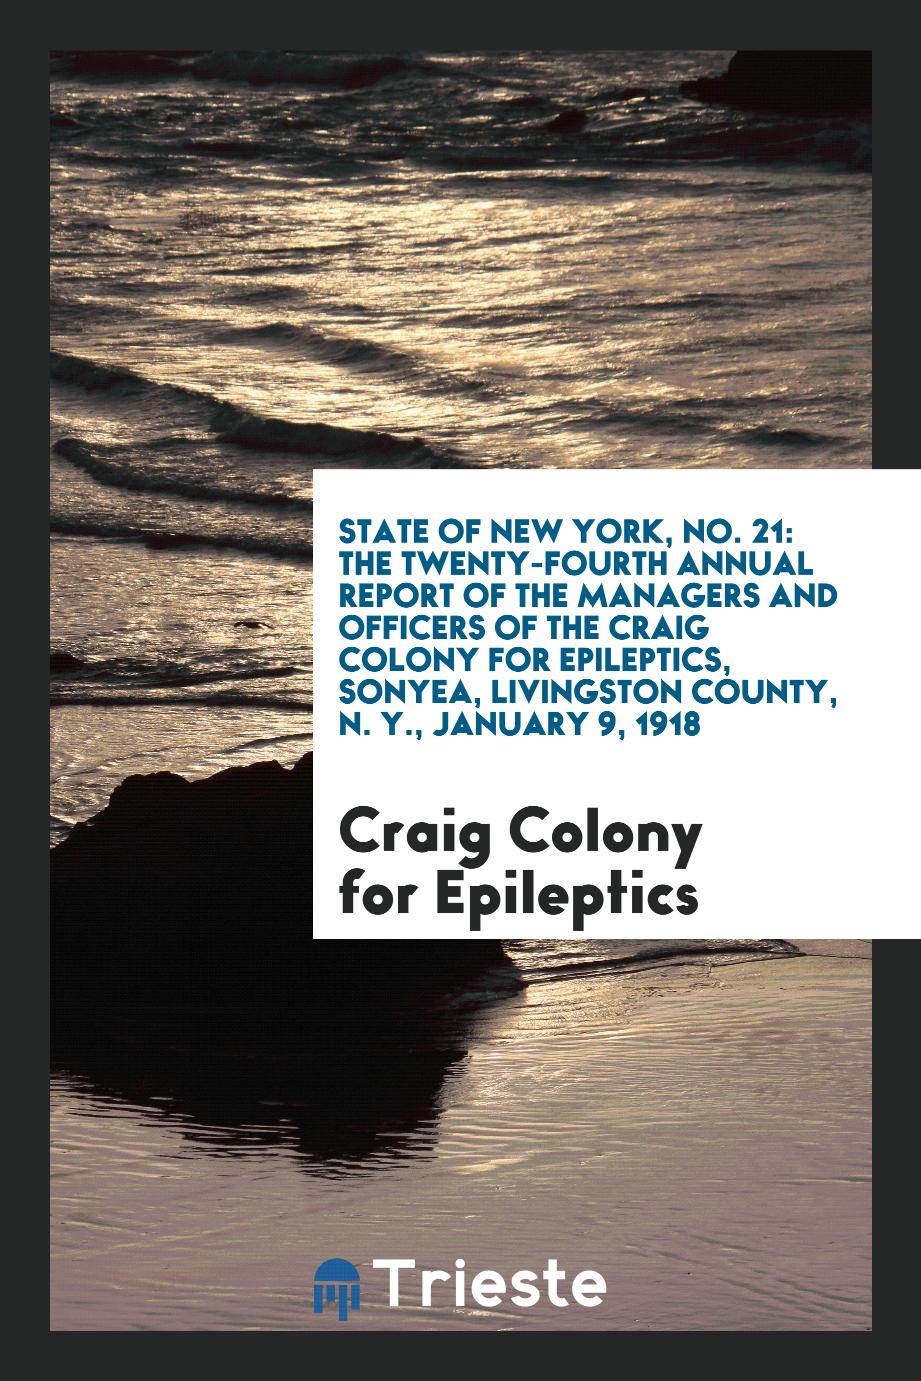 State of New York, No. 21: The Twenty-Fourth Annual Report of the Managers and Officers of the Craig Colony for Epileptics, Sonyea, Livingston County, N. Y., January 9, 1918